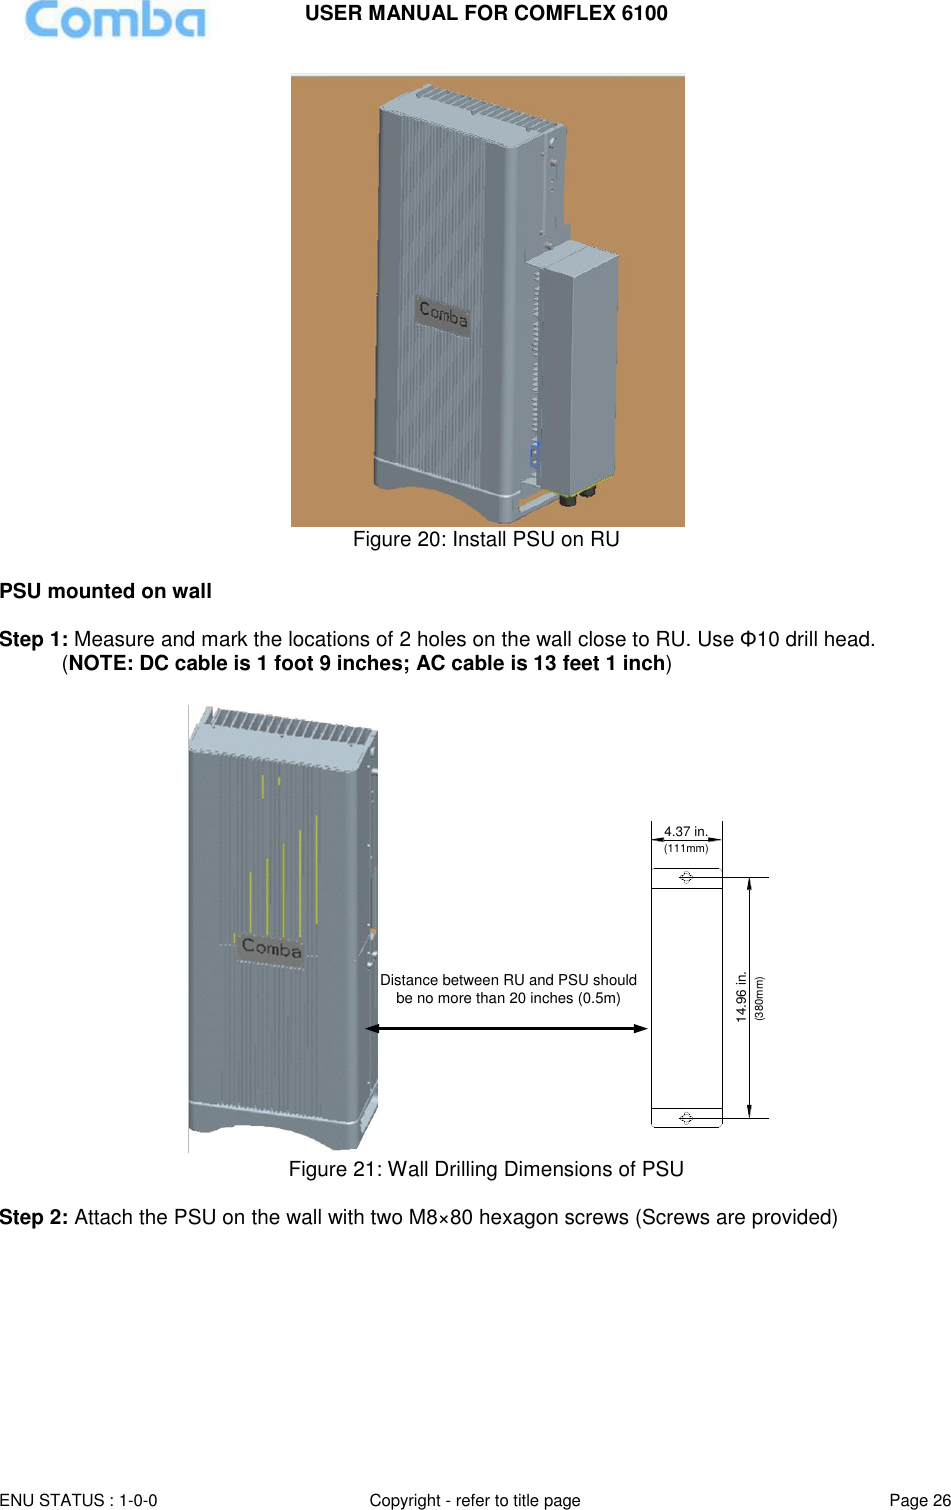 USER MANUAL FOR COMFLEX 6100 ENU STATUS : 1-0-0 Copyright - refer to title page Page 26   Figure 20: Install PSU on RU  PSU mounted on wall  Step 1: Measure and mark the locations of 2 holes on the wall close to RU. Use Φ10 drill head.  (NOTE: DC cable is 1 foot 9 inches; AC cable is 13 feet 1 inch)  14.96 in.4.37 in.(111mm)(380mm)Distance between RU and PSU should be no more than 20 inches (0.5m) Figure 21: Wall Drilling Dimensions of PSU  Step 2: Attach the PSU on the wall with two M8×80 hexagon screws (Screws are provided)  